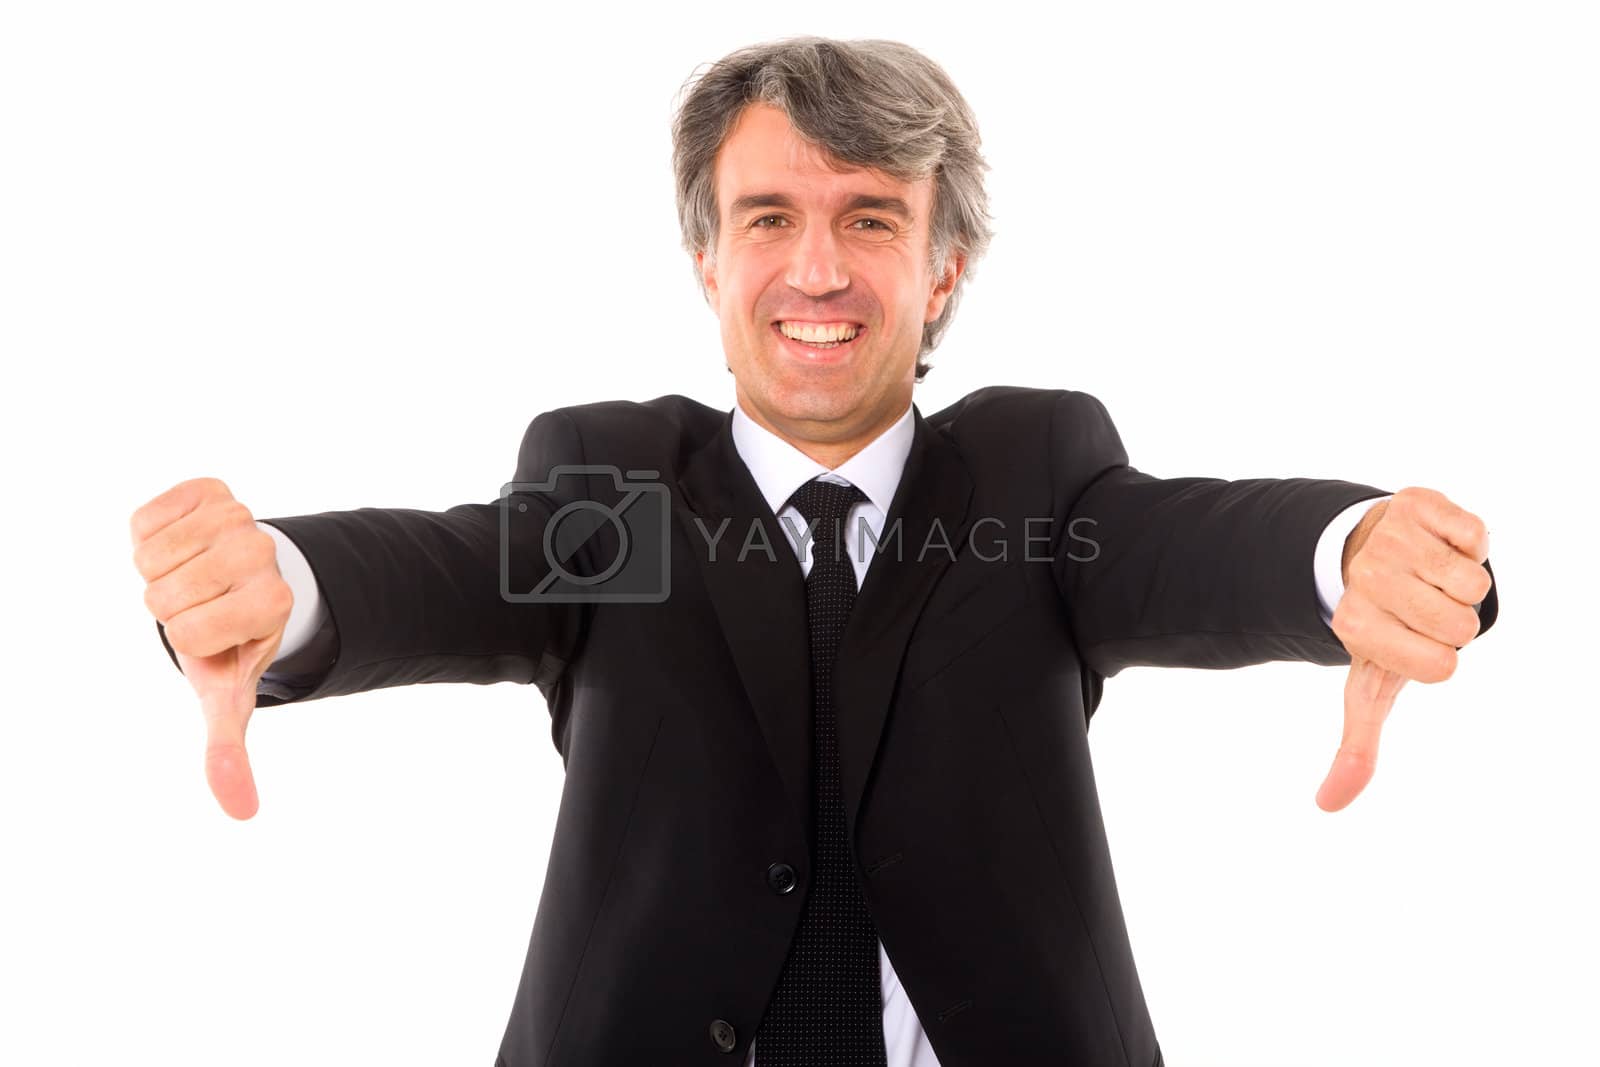 Royalty free image of businessman thumbs down by ambro